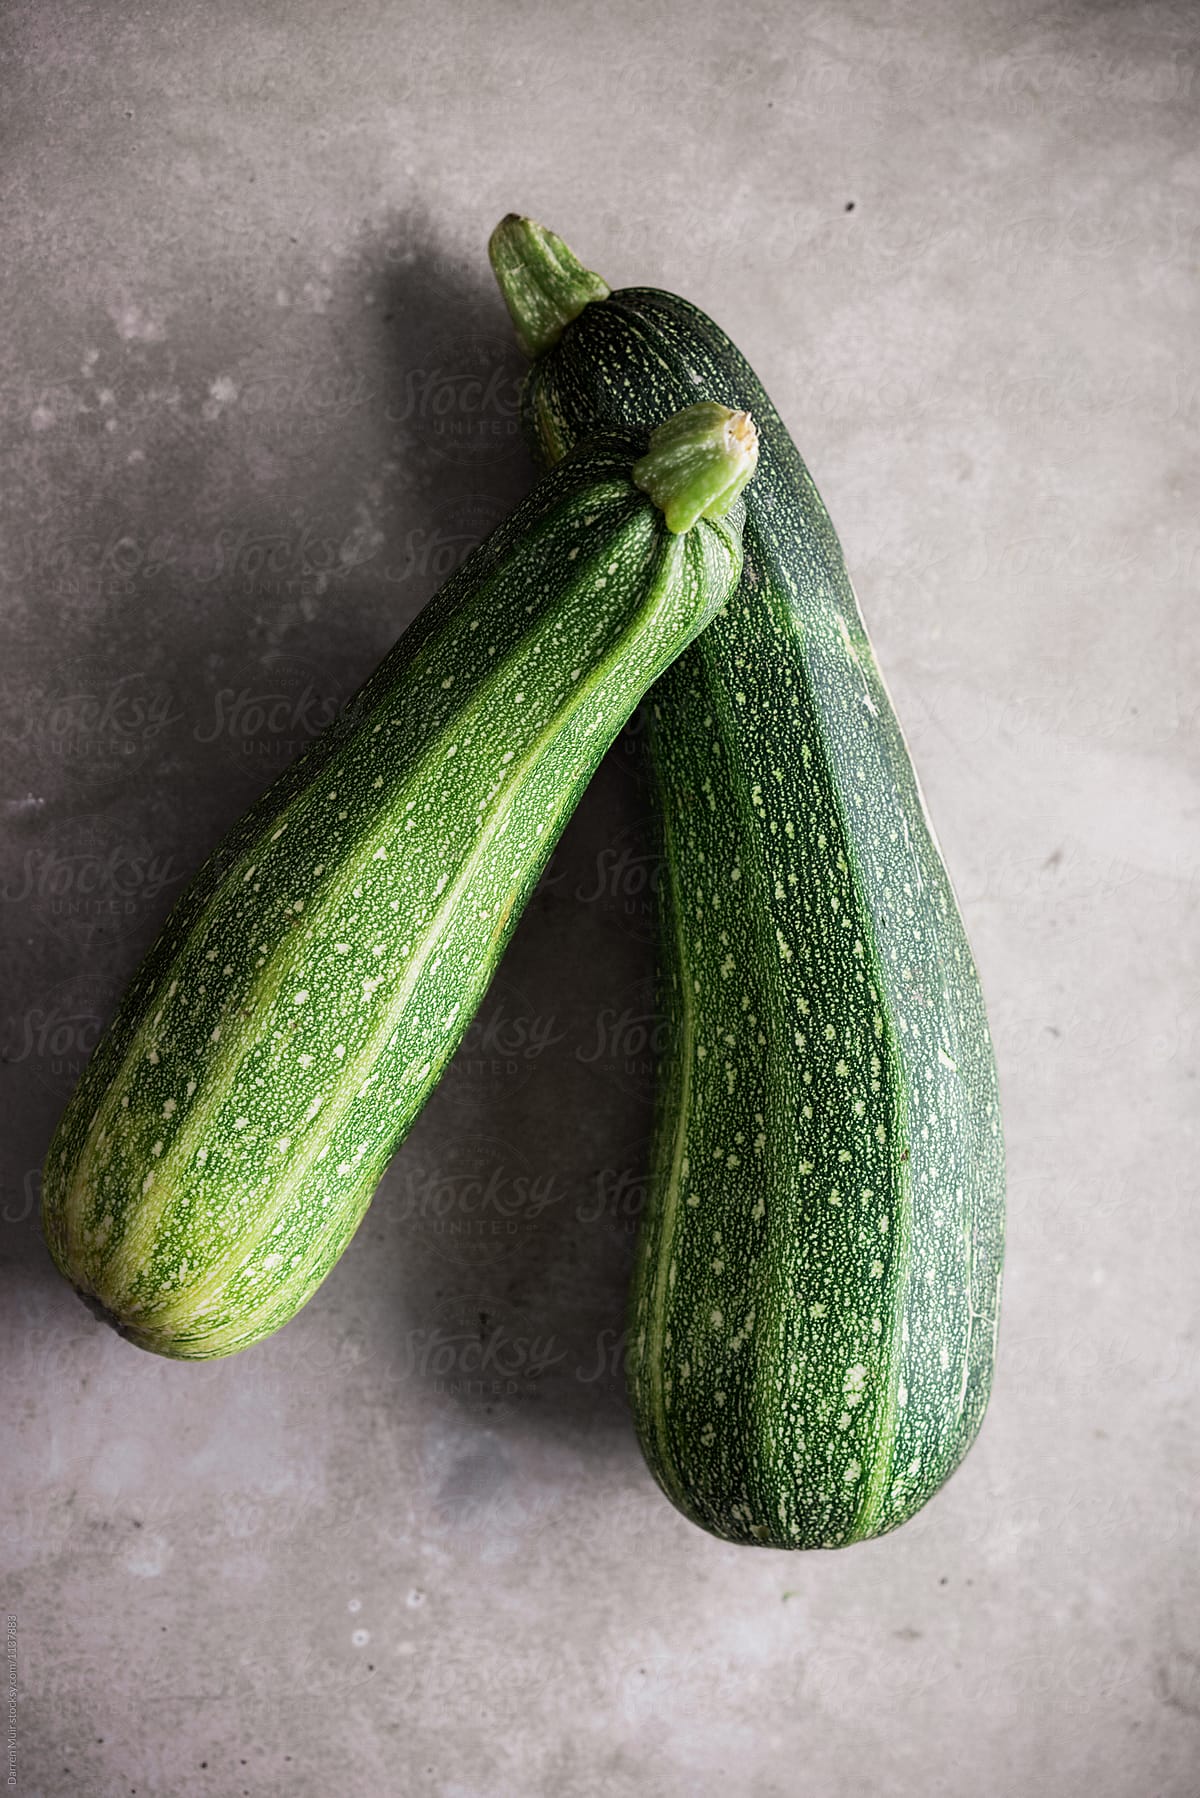 Two homegrown marrow on concrete background.